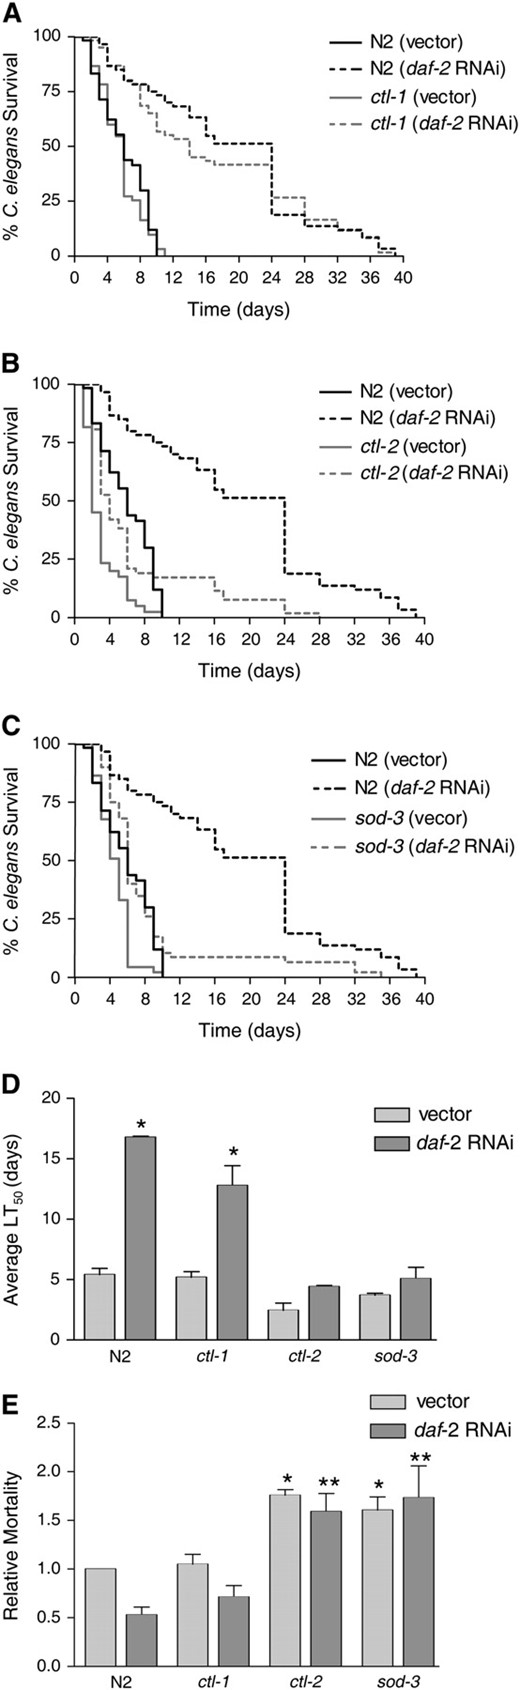 Mutations in ctl-2 and sod-3 significantly reduce daf-16-mediated resistance to E. faecalis, but a mutation in ctl-1 does not. The following strains were fed control vector or daf-2 RNAi prior to exposure to E. faecalis. Killing by the pathogen was assessed by survival over time. (A) N2 and ctl-1(u800)II (Petriv and Rachubinski 2004). (B) N2 and ctl-2(ua90)II (Petriv and Rachubinski 2004). (C) N2 and sod-3(gk235)X. (D) The average time to death (LT50) for the experiments shown in A–C. The average was calculated from two independent experiments each with an N of 60–90 worms (also presented in Table 1). The error bars correspond to the standard error. The asterisks represent a statistically significant difference (P < 0.05) in the survival of the strain upon daf-2 RNAi. (E) The LT50 of both E. faecalis (killing assay) and E. coli (longevity assay) was determined for each strain/RNAi condition (Table 1). The relative mortality of the worms on the pathogen (E. faecalis) compared to the nonpathogen (E. coli) was calculated as previously described (Tenor  et al. 2004). The average from two independent experiments, each with an N of 60–90 worms, is shown. The error bars correspond to the standard error. Unpaired t-tests compared the significance of the differences between groups. An asterisk indicates a significant difference (P < 0.05) compared to N2 worms exposed to vector. Two asterisks indicate a significant difference (P < 0.05) compared to N2 worms exposed to daf-2 RNAi.